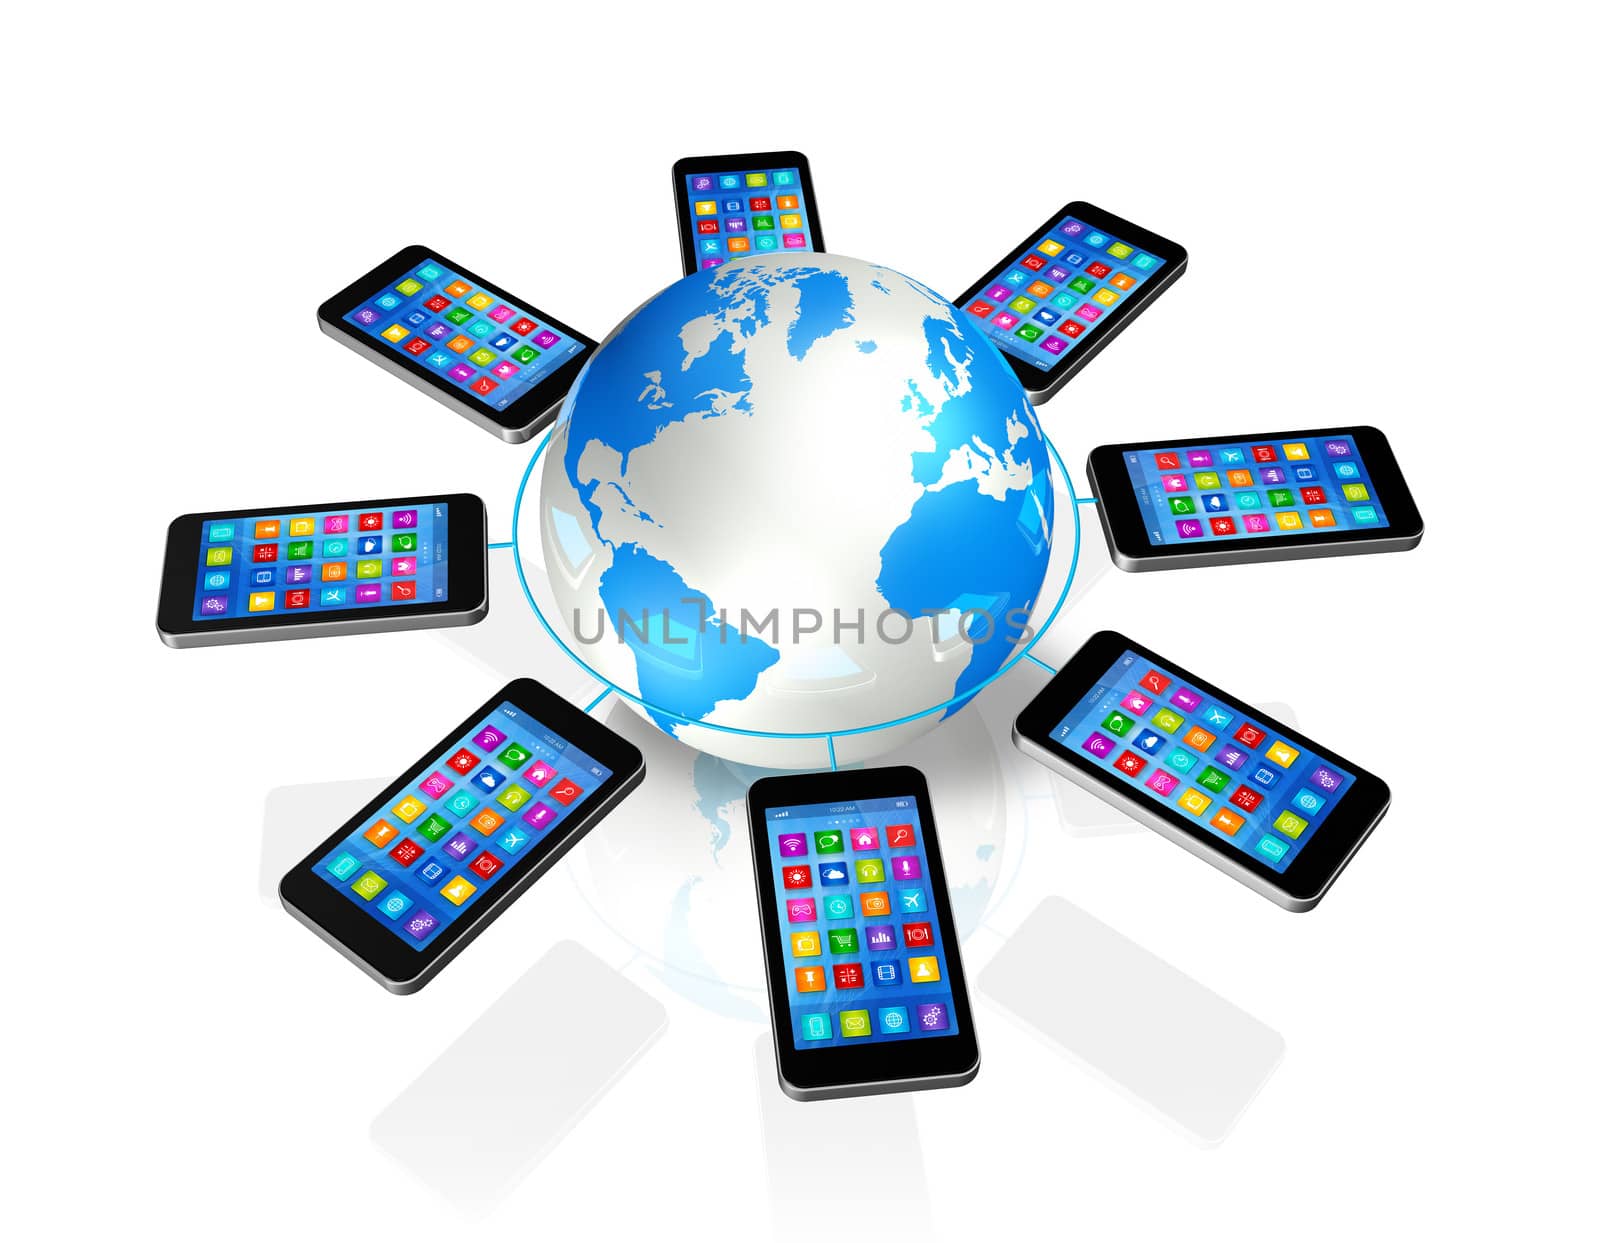 3D Smartphones Around World Globe, isolated on white - Global Communication Concept